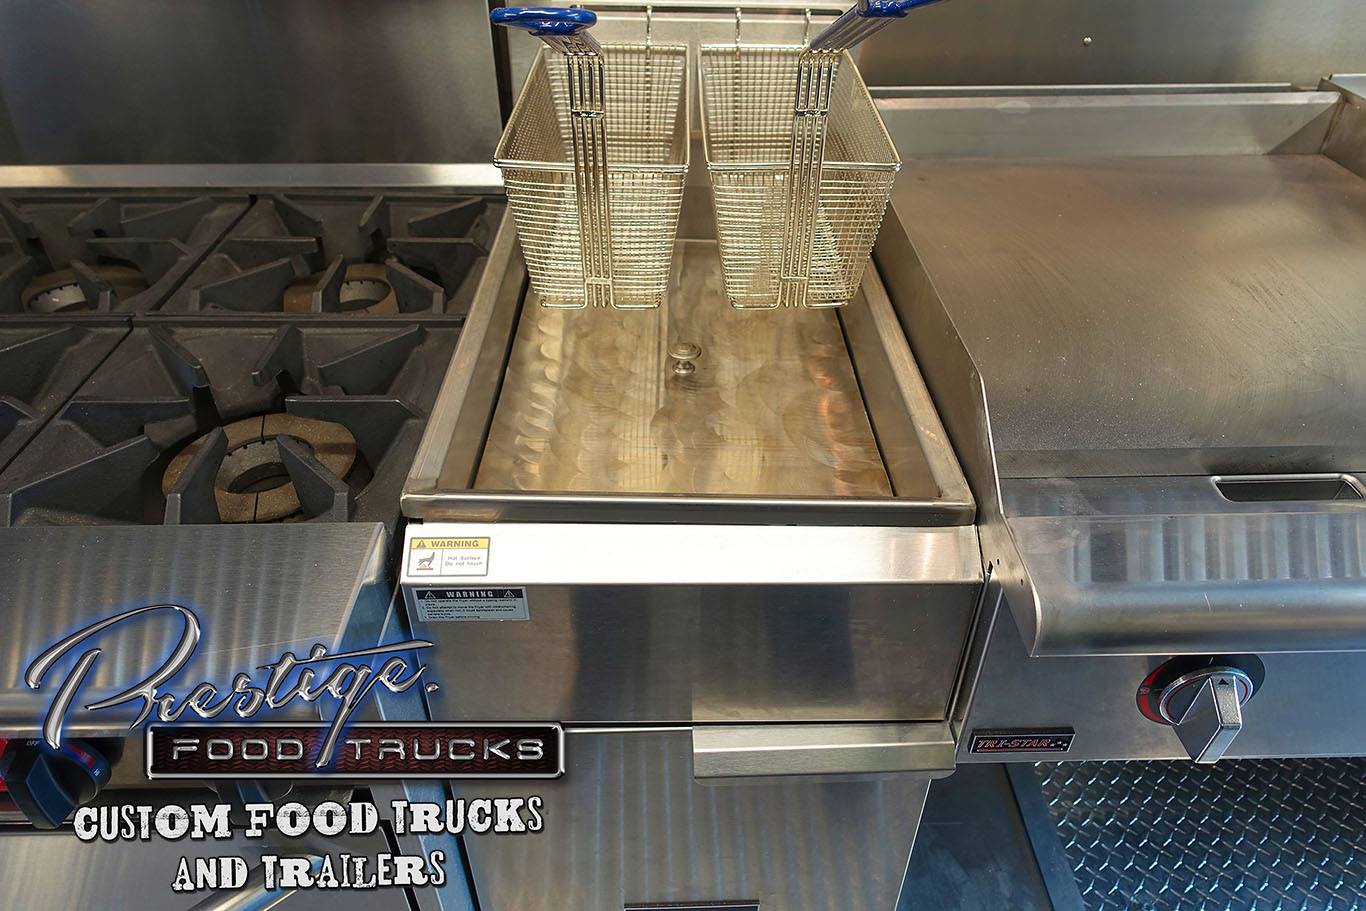 food truck interior close up photo on fryers